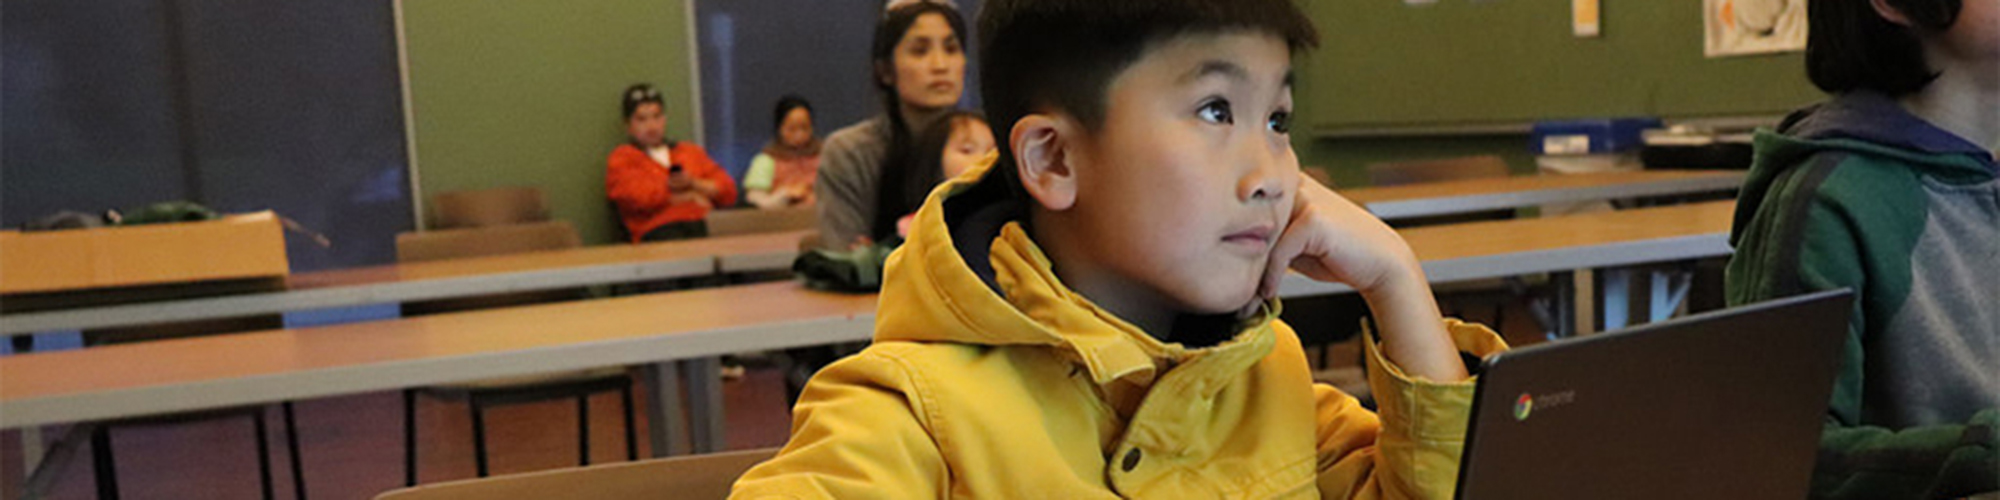 A young boy in a yellow jacket sits behind a computer.